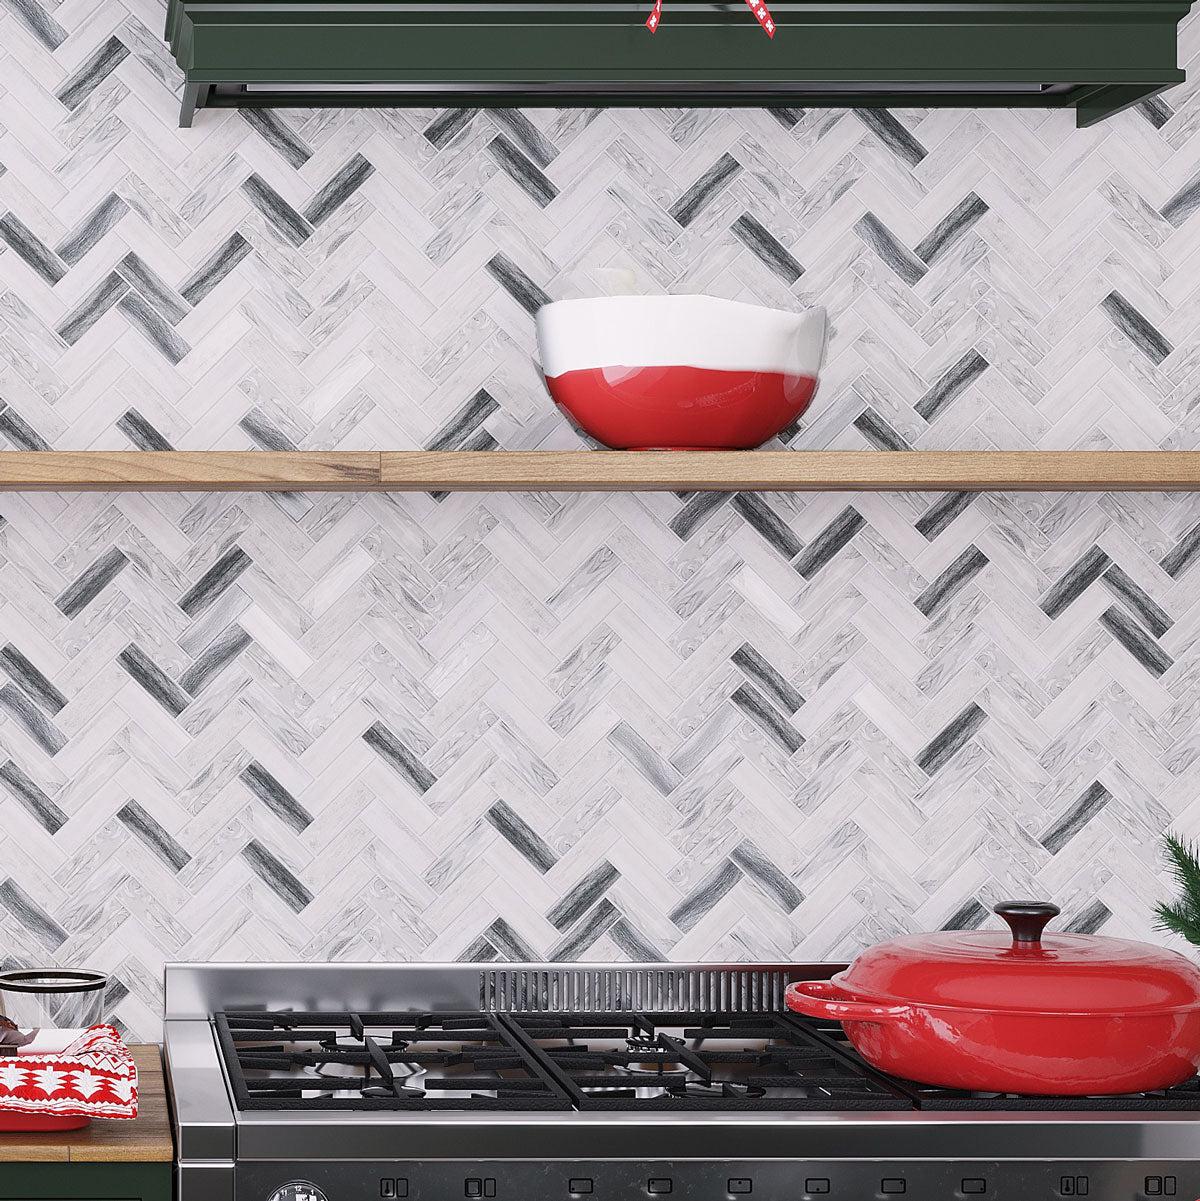 Kitchen Backsplash with Recycled Glass Herringbone tiles in neutral wood look gray tones with open shelves and red cooking accessories